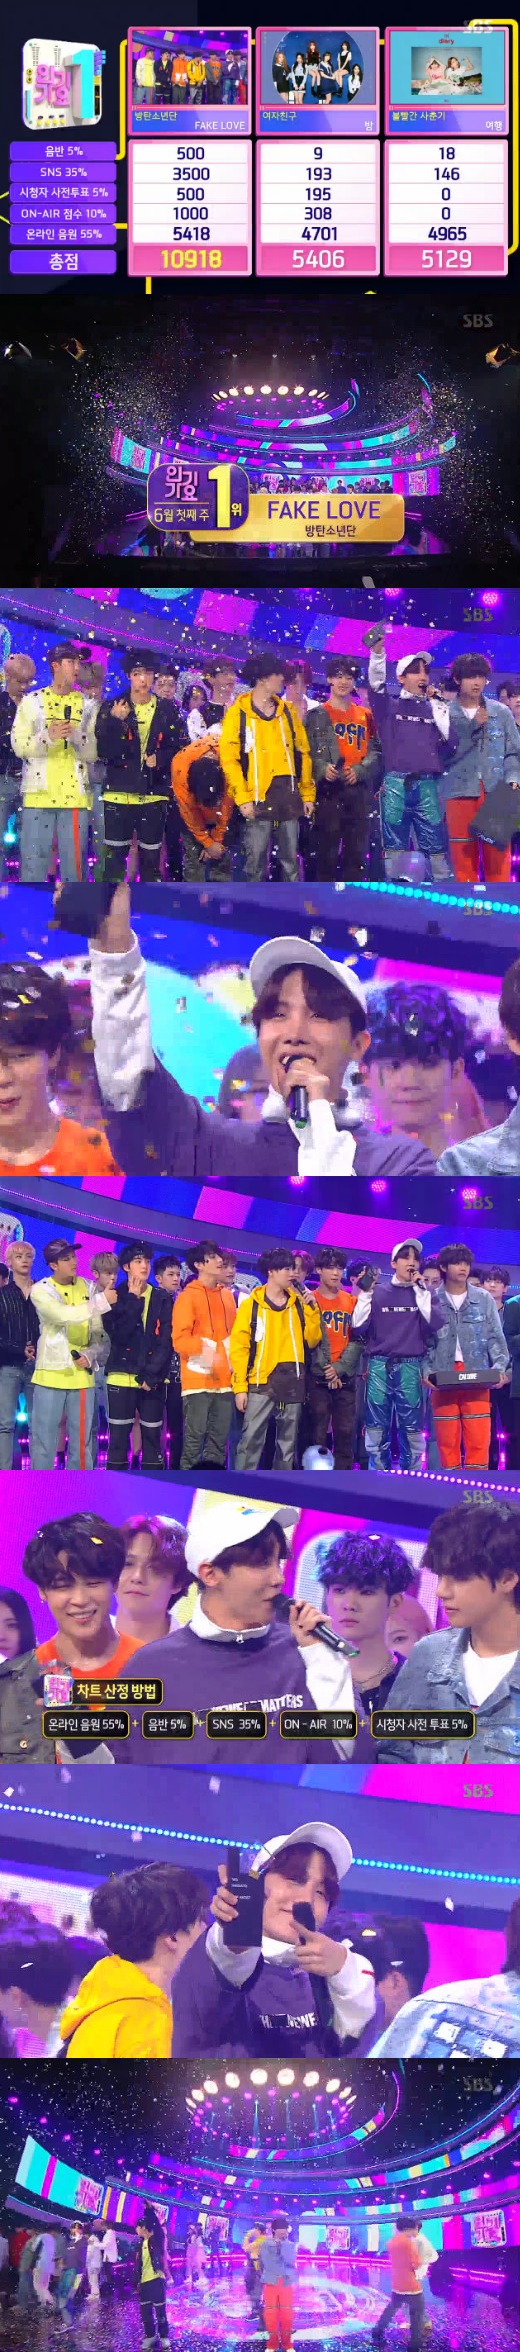 Group BTS topped Inkigayo for two consecutive weeksOn SBS Inkigayo broadcasted on the 3rd, SHINee, BTS, AOA, Cross Jean, Dream Catcher, Bigton, Enflying, Pristin V, South Club, Samuel, The Eastlight, NTB, Khan and Gracie appeared.On the day of the show, BTS FAKE LOVE, girlfriend Night and red adolescent Travel were the top contenders. As a result, BTS won first place for two consecutive weeks.They proved popular in Korea as well as Billboard charts.After the award, Jay Hop said, Thank you. Its a series of good things.I would like to say thank you for this place.  I would like to thank the members.I want to congratulate you and say thank you, he said.On the other hand, on the same day, SHINee key was put into a special MC and filled the vacancy of Seventeen Mingyu, who was away from the Japanese schedule.He boasted a stable progression with the actors, Chae Yeon and Song Kang. He said, It was more fun because it was MC.The comeback stage also caught the eye. SHINee, AOA, Pristin V, and Samuel staged their comeback.SHINee, who returned to fans after a year and eight months, showed off the comeback stages of two songs: All Day All Night and Derry Street. The debut 10th anniversary of his skill was outstanding.AOA, which has been restructured into a six-member group, has set up a comeback stage with Super Duper and Bingle Bangle, attracting attention from AOAs unique healthy and bright energy as well as point choreographers.Pristin V boasted the charm of Girl Crush by comebacking Na Young, Roa, Eunwoo, Lena and Kyung Kyung with the first unit Pristin V.Samuel showed off his charisma with a dark atmosphere Teenager that became more mature.BTS